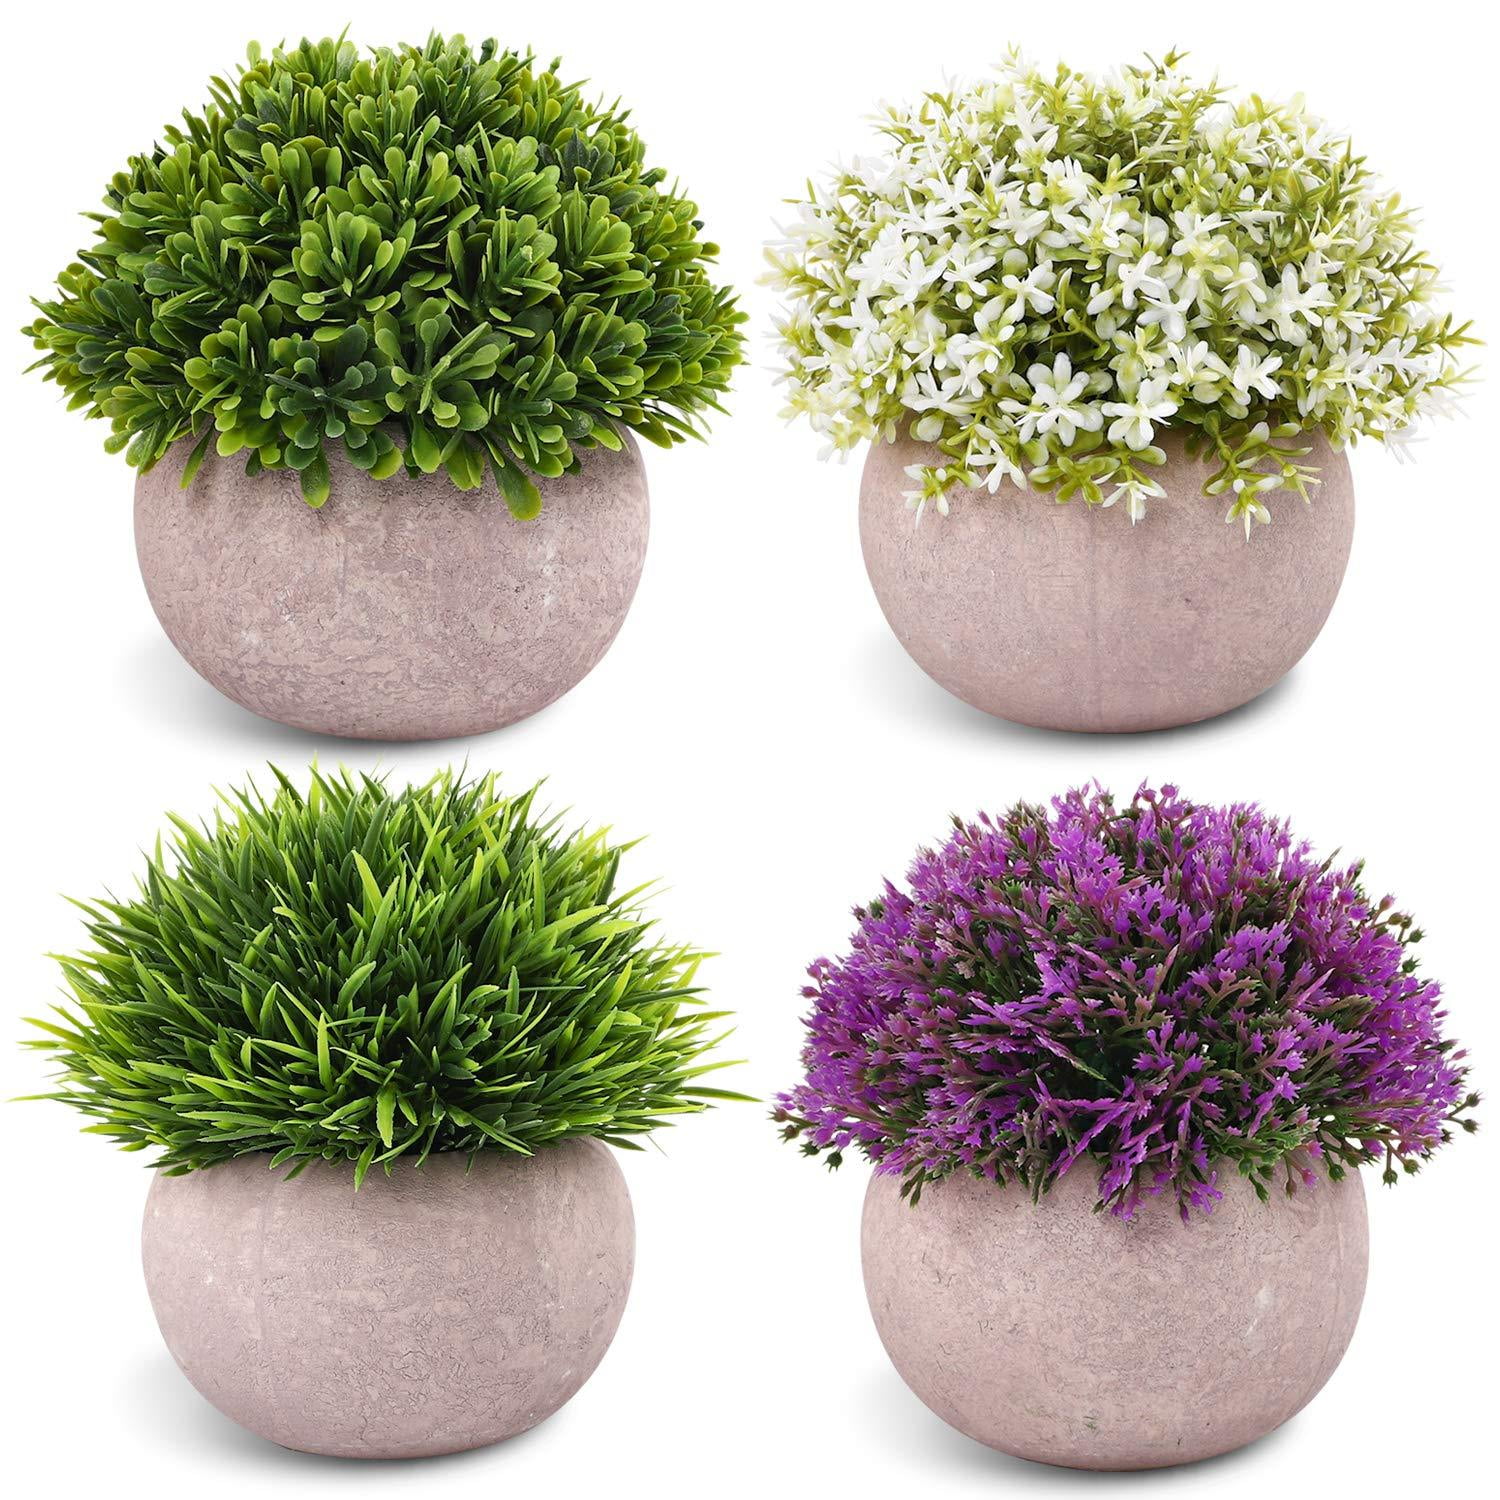 Azoco Small Artificial Plants Mini Fake Plants Decoration Fresh Green Grass in Pot for Bathroom Farmhouse Home House Office Table Decor Set of 3 Mixed